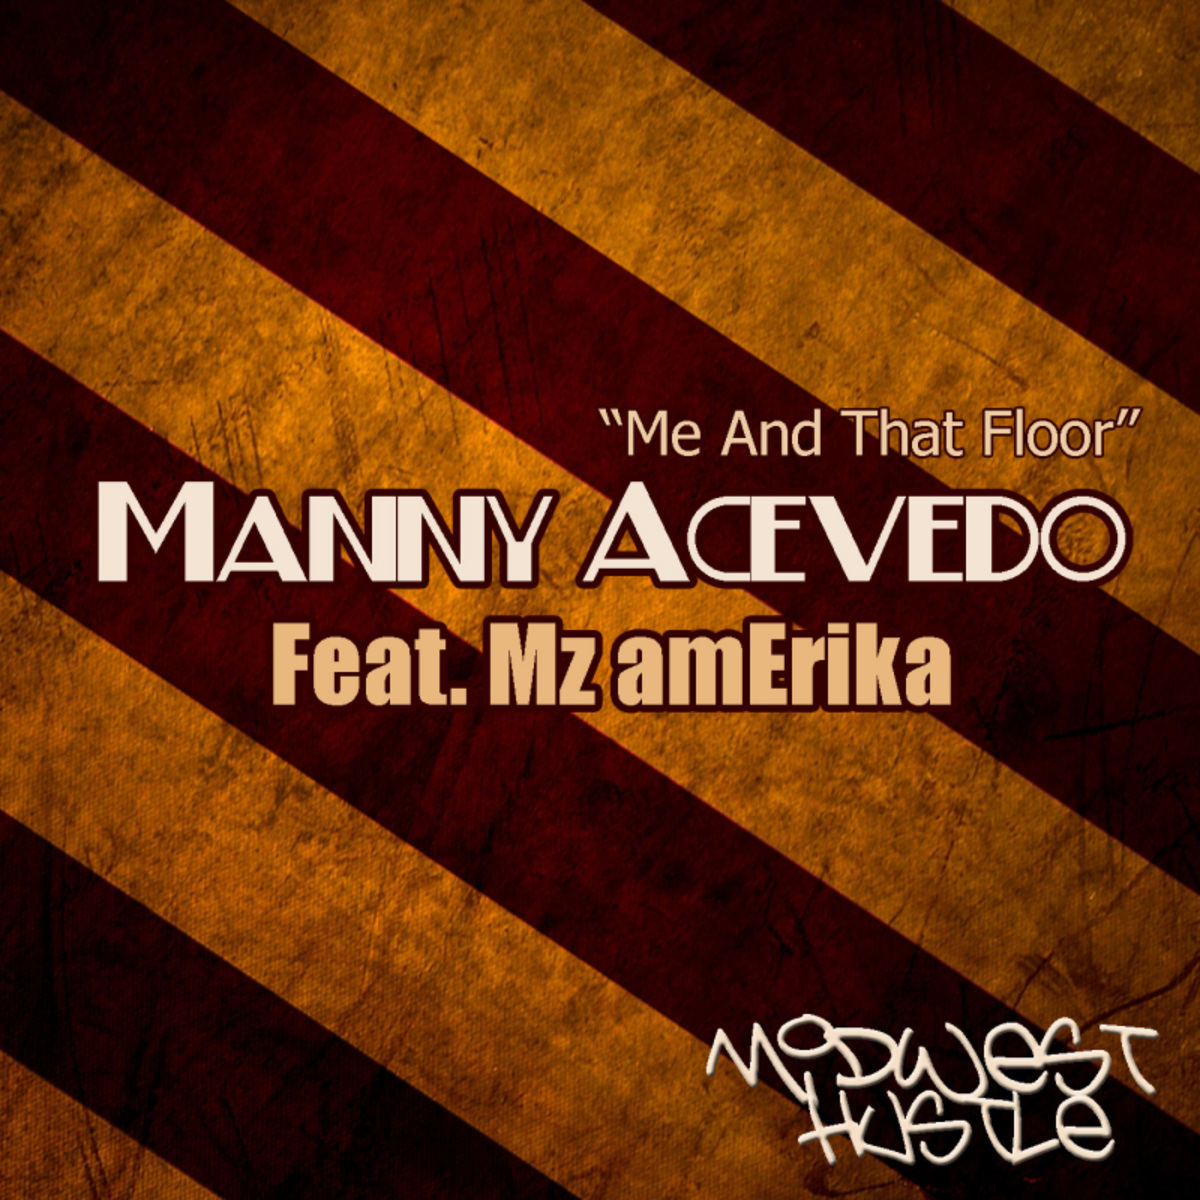 Manny Acevedo - Me And That Floor (feat. Mz amErika) / Midwest Hustle Music